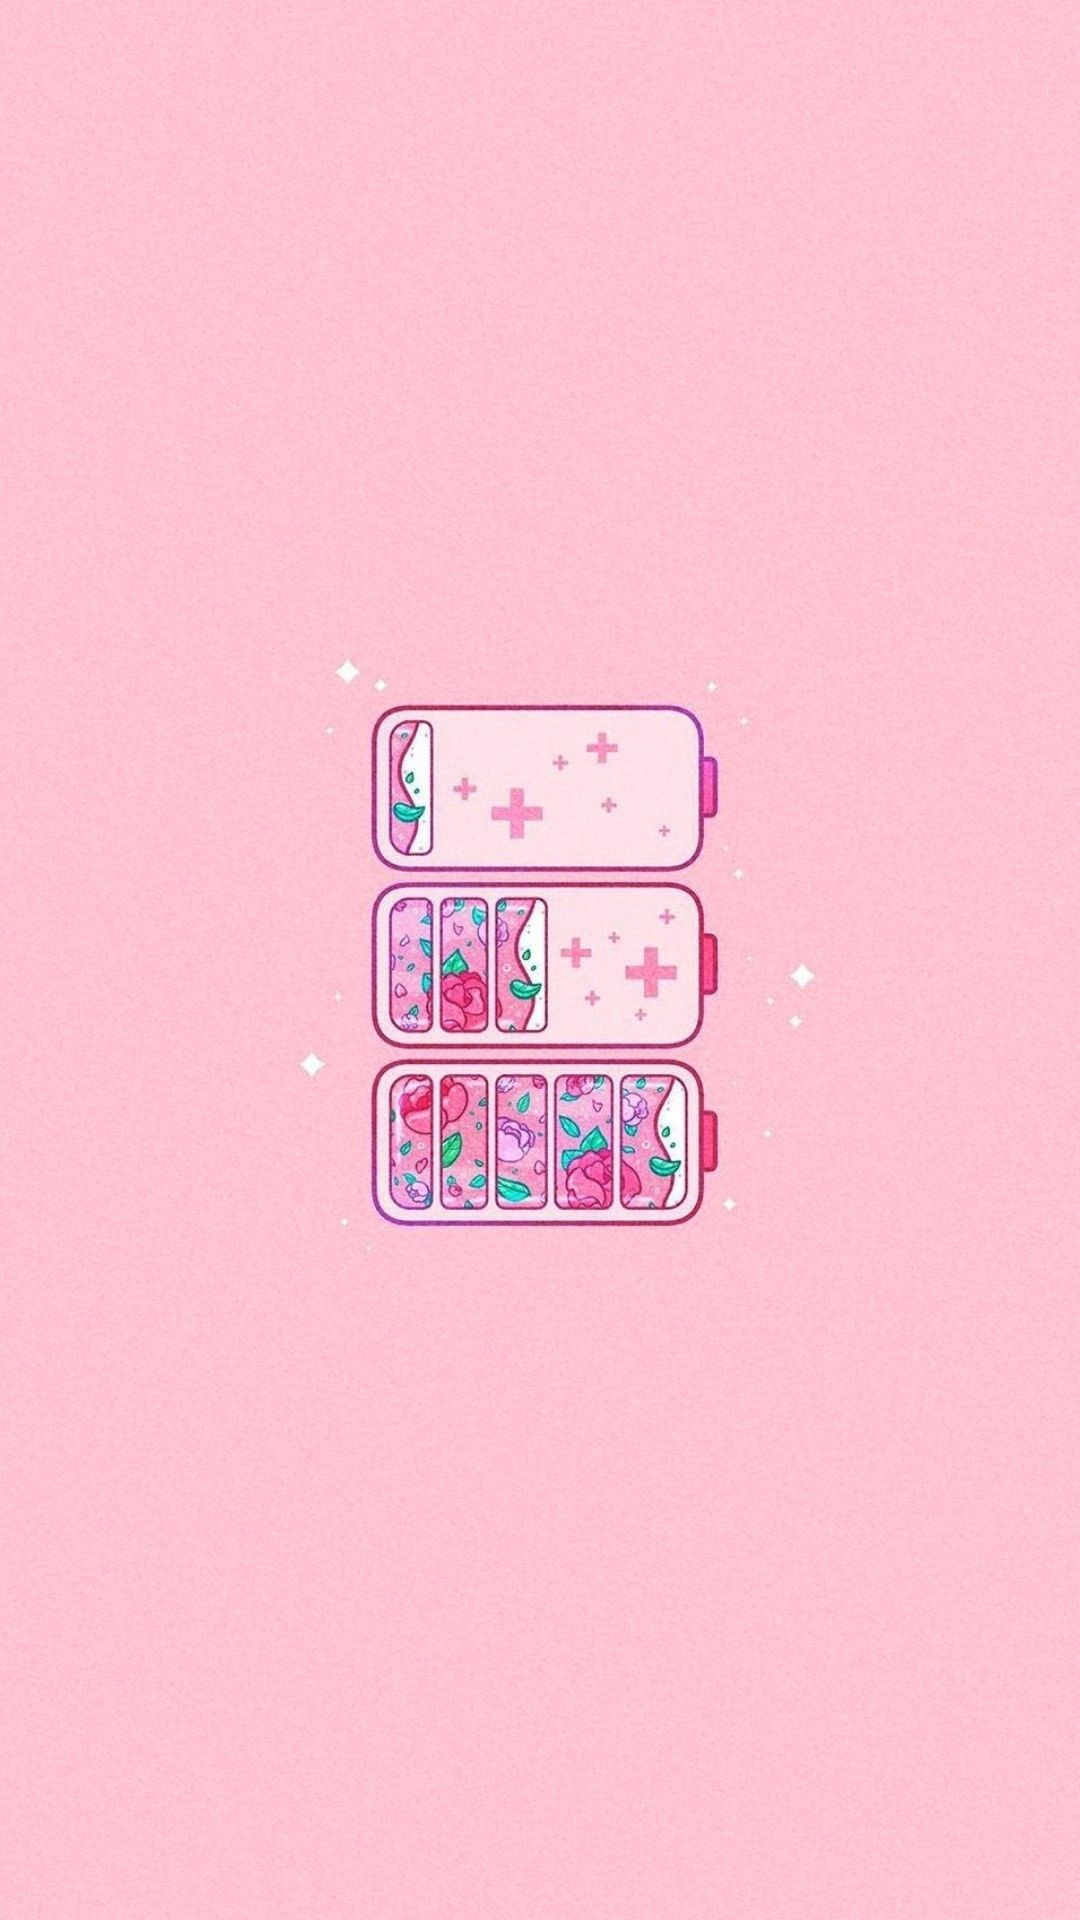 IPhone wallpaper of a pink battery with three different levels of charge - Pink anime